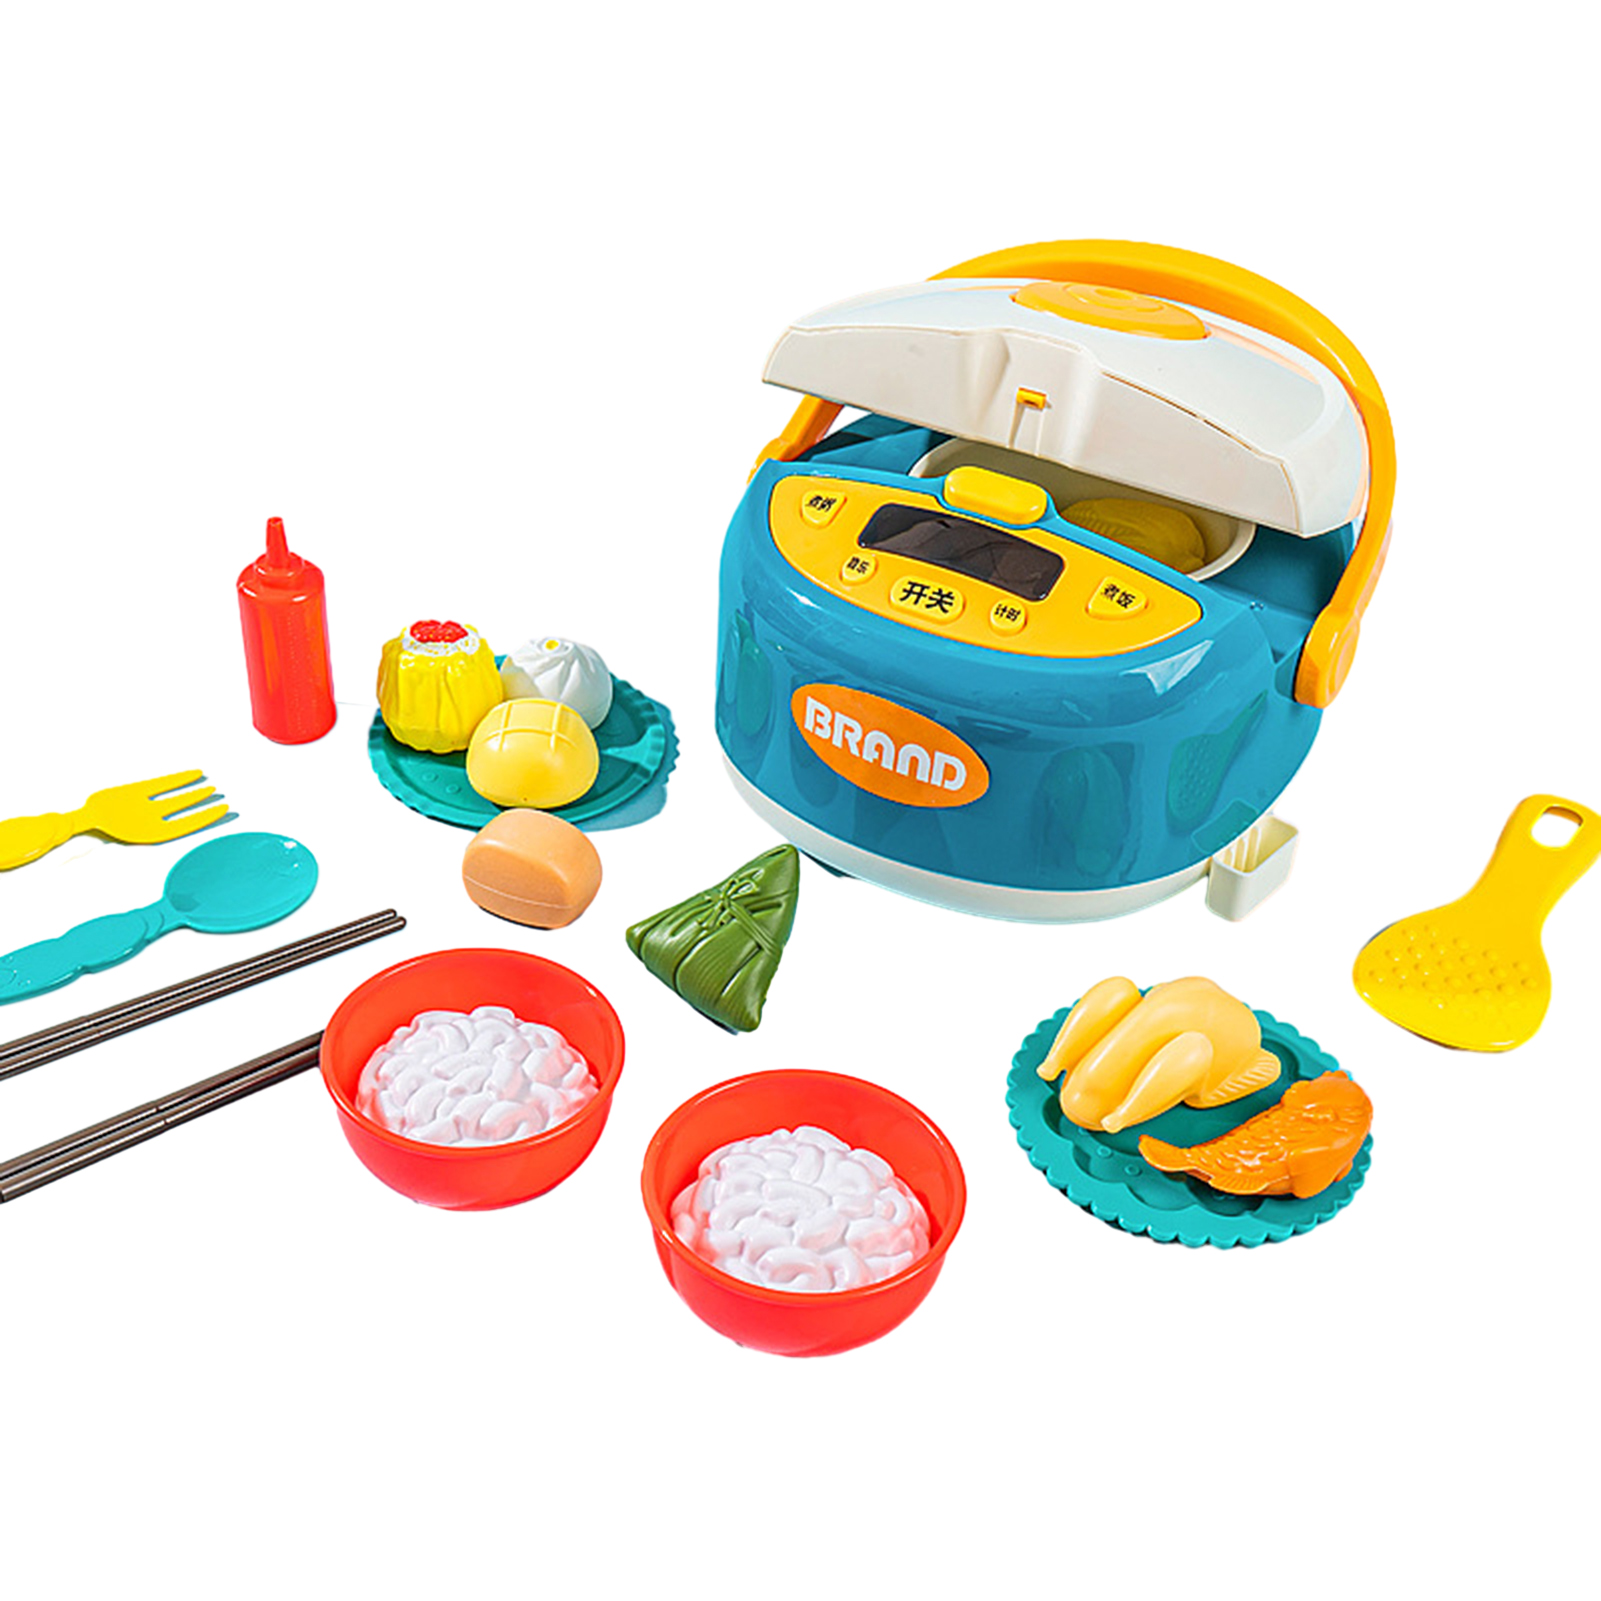 The Pisciculture Realistic Children Cooking Toy Kitchen Cooking Toy Set